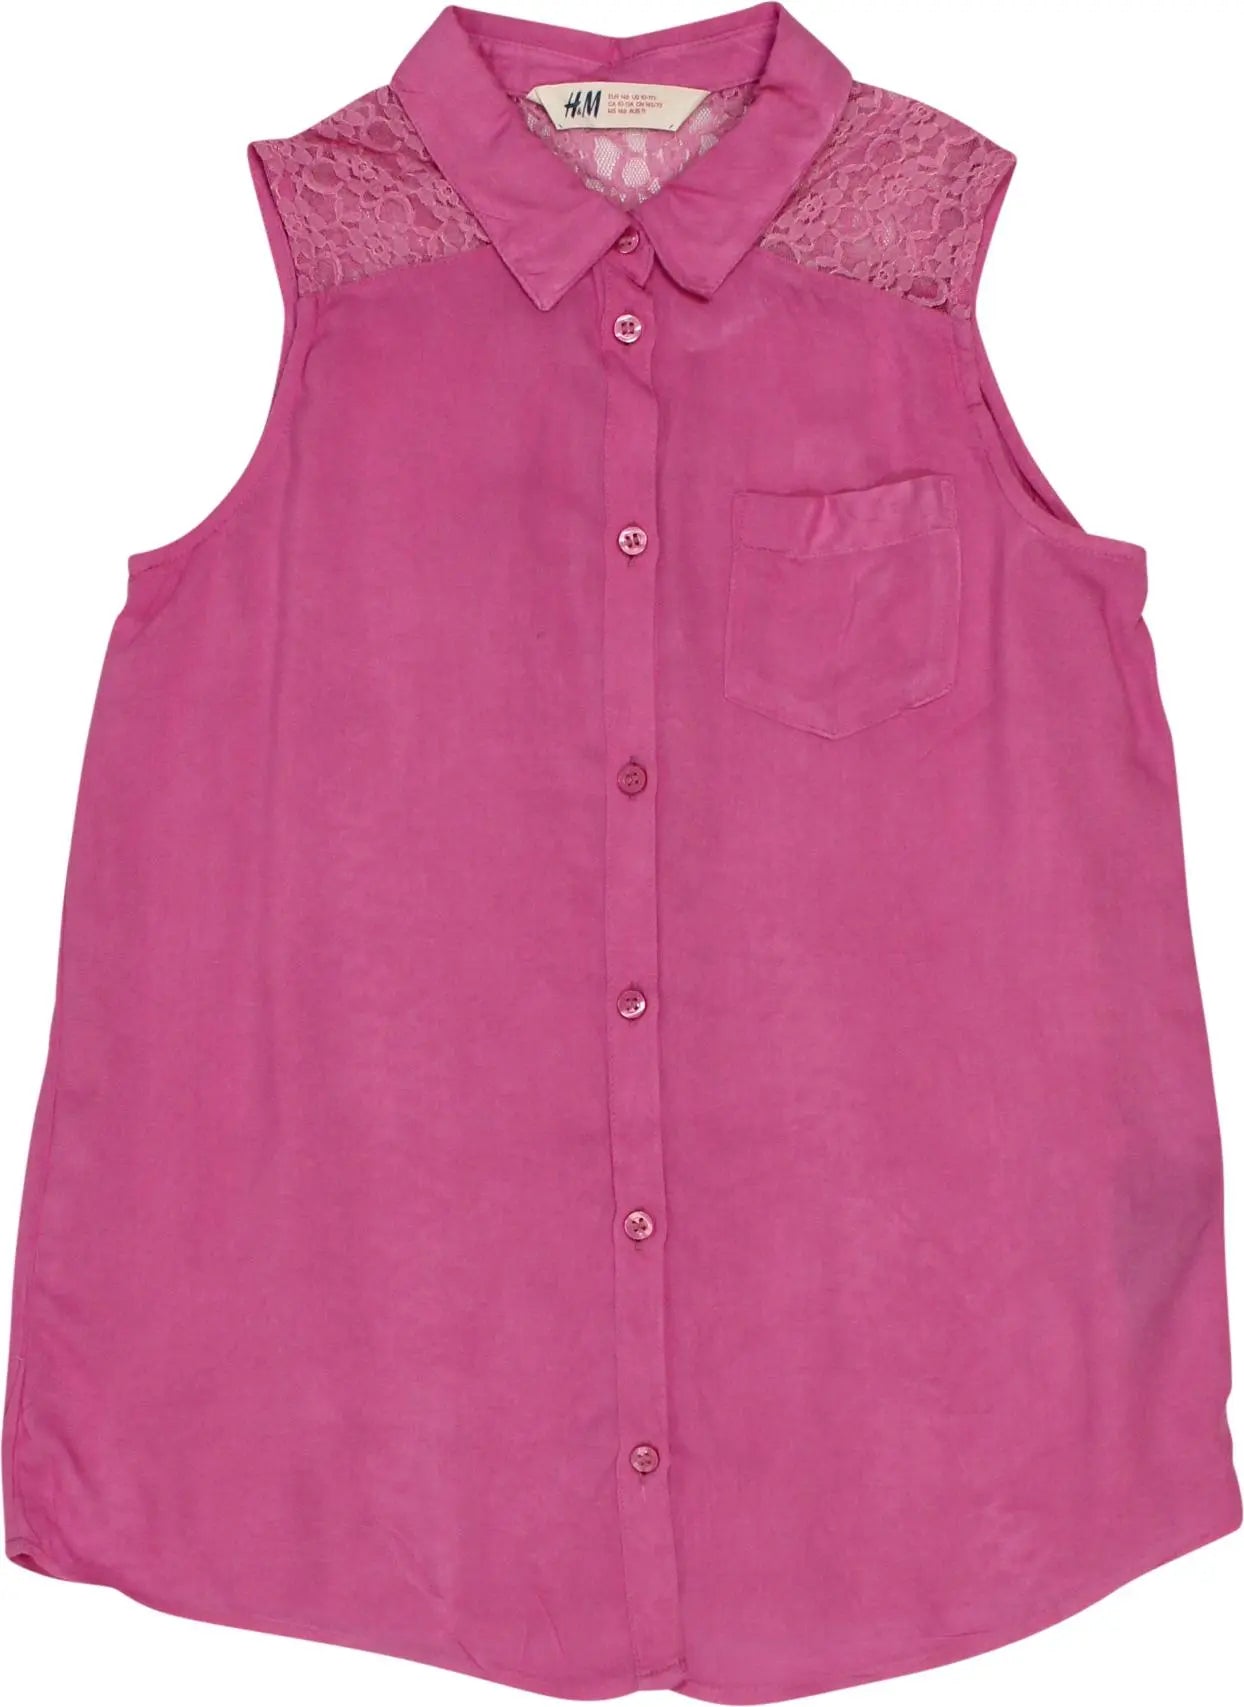 H&M - Pink Sleeveless Blouse- ThriftTale.com - Vintage and second handclothing